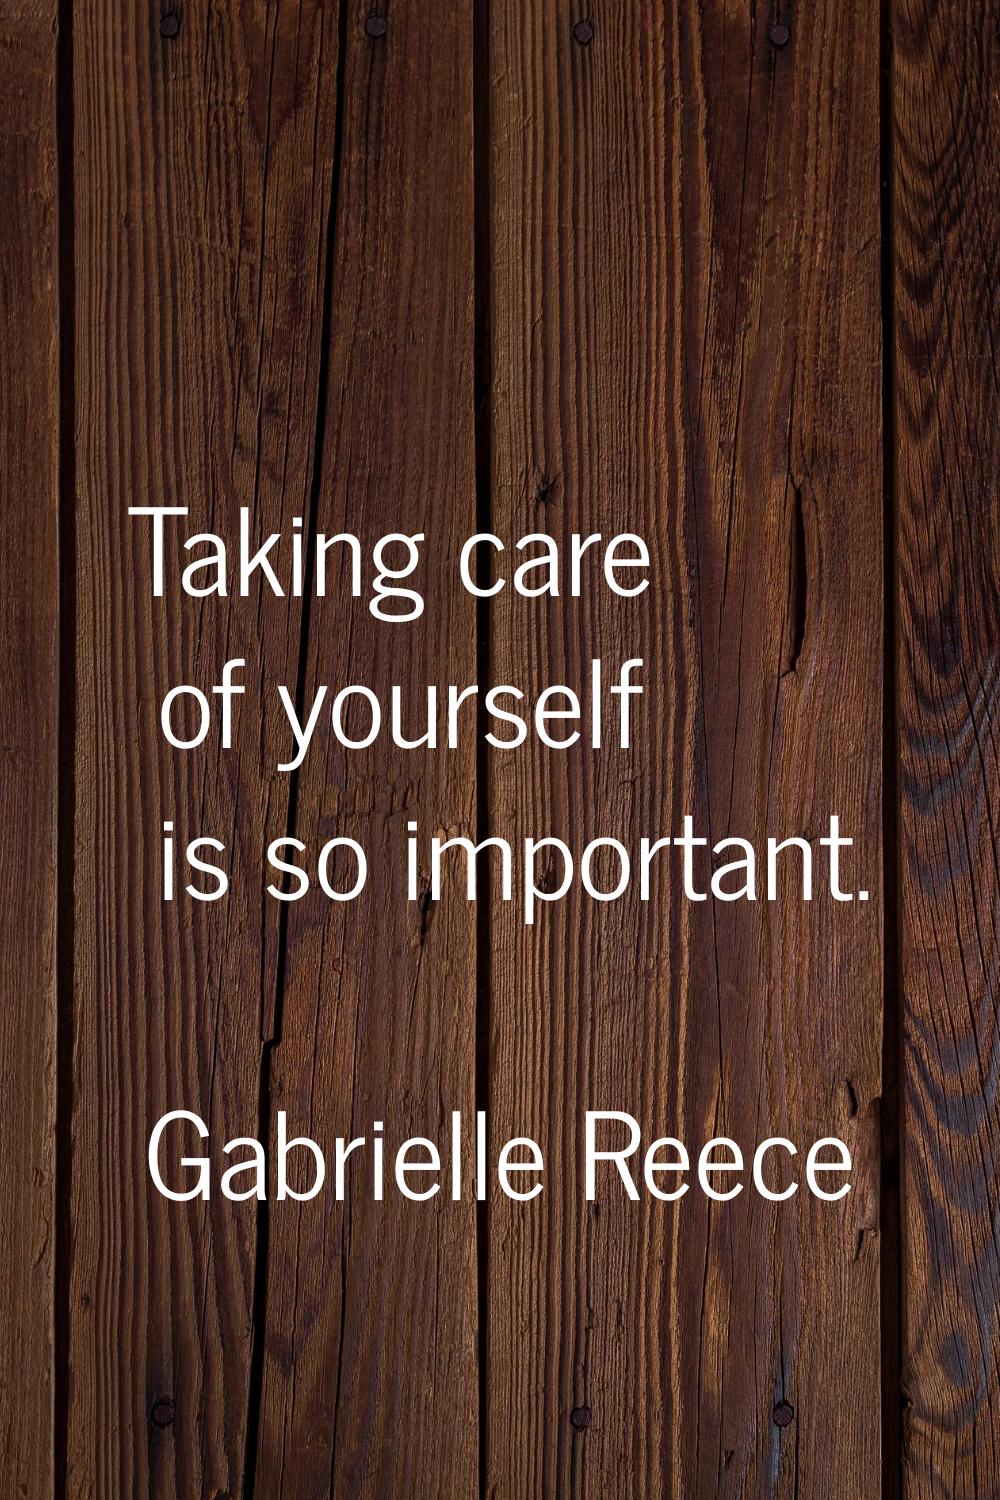 Taking care of yourself is so important.